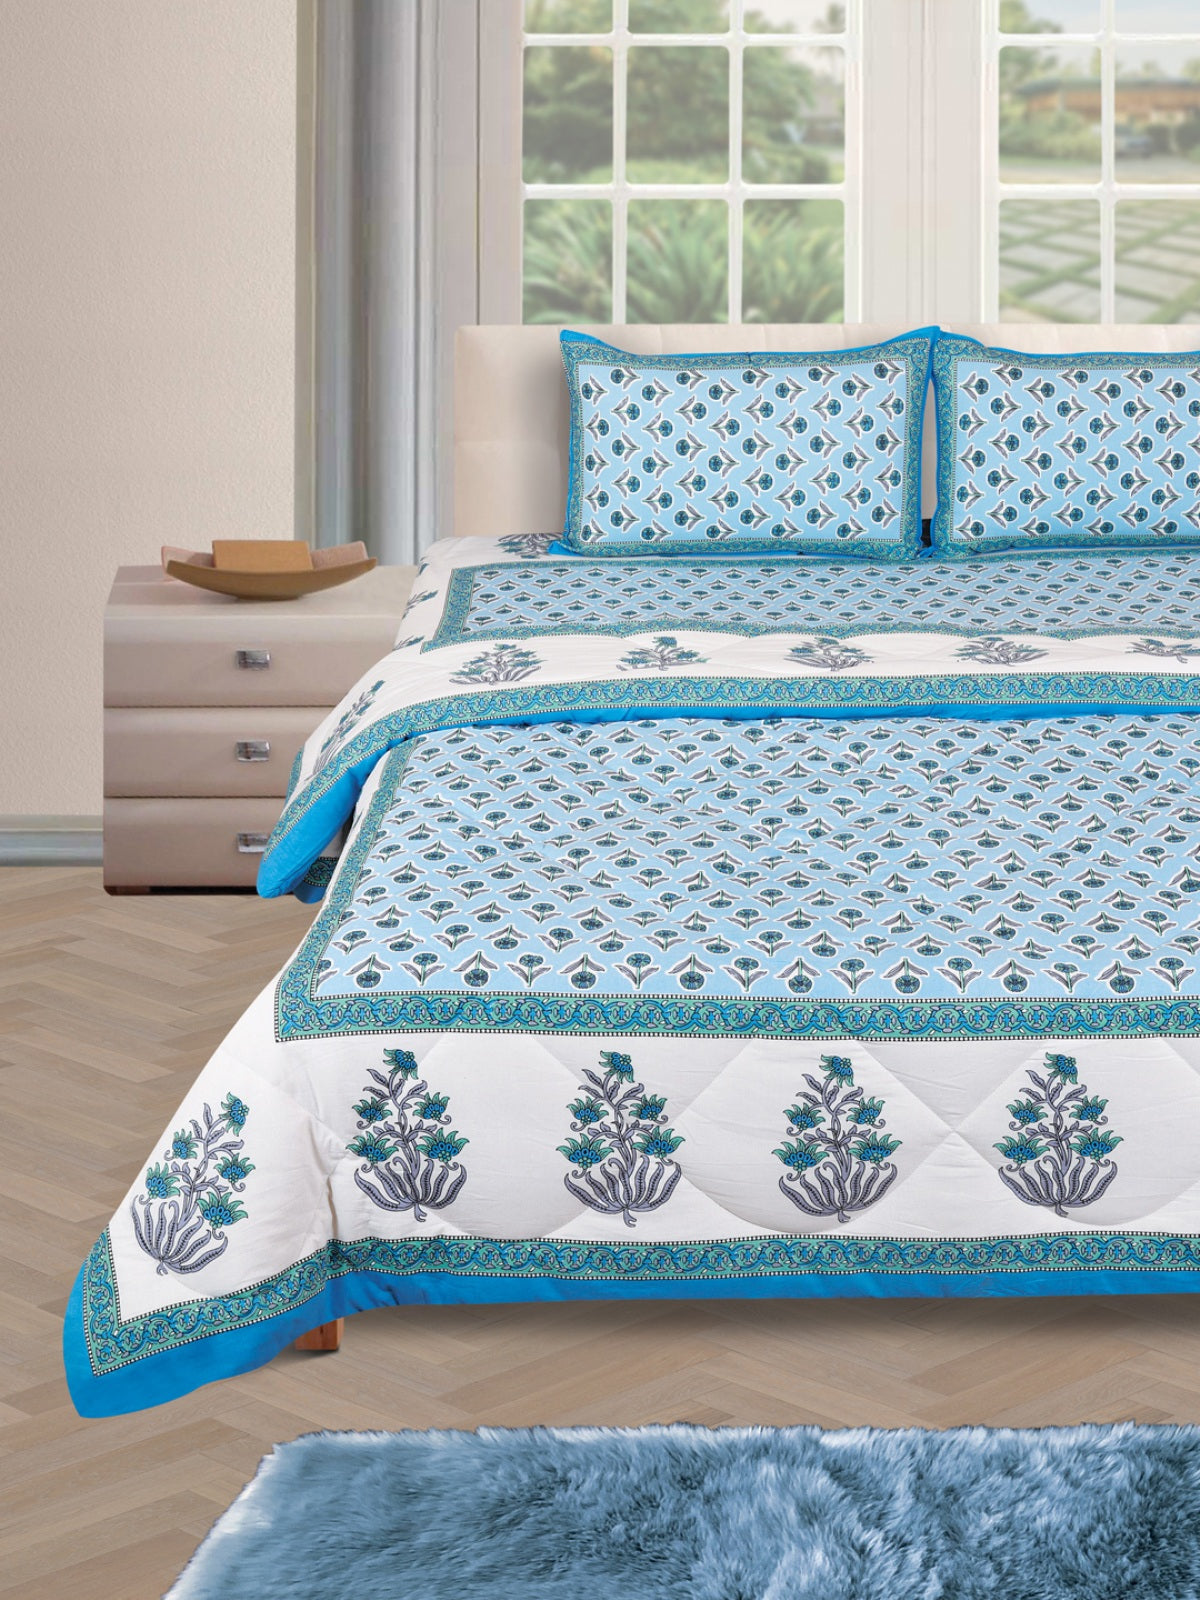 Jaipuri Bedding Set Reversible AC Comforter with Bedsheet and 2 Pillow Covers, Turquoise